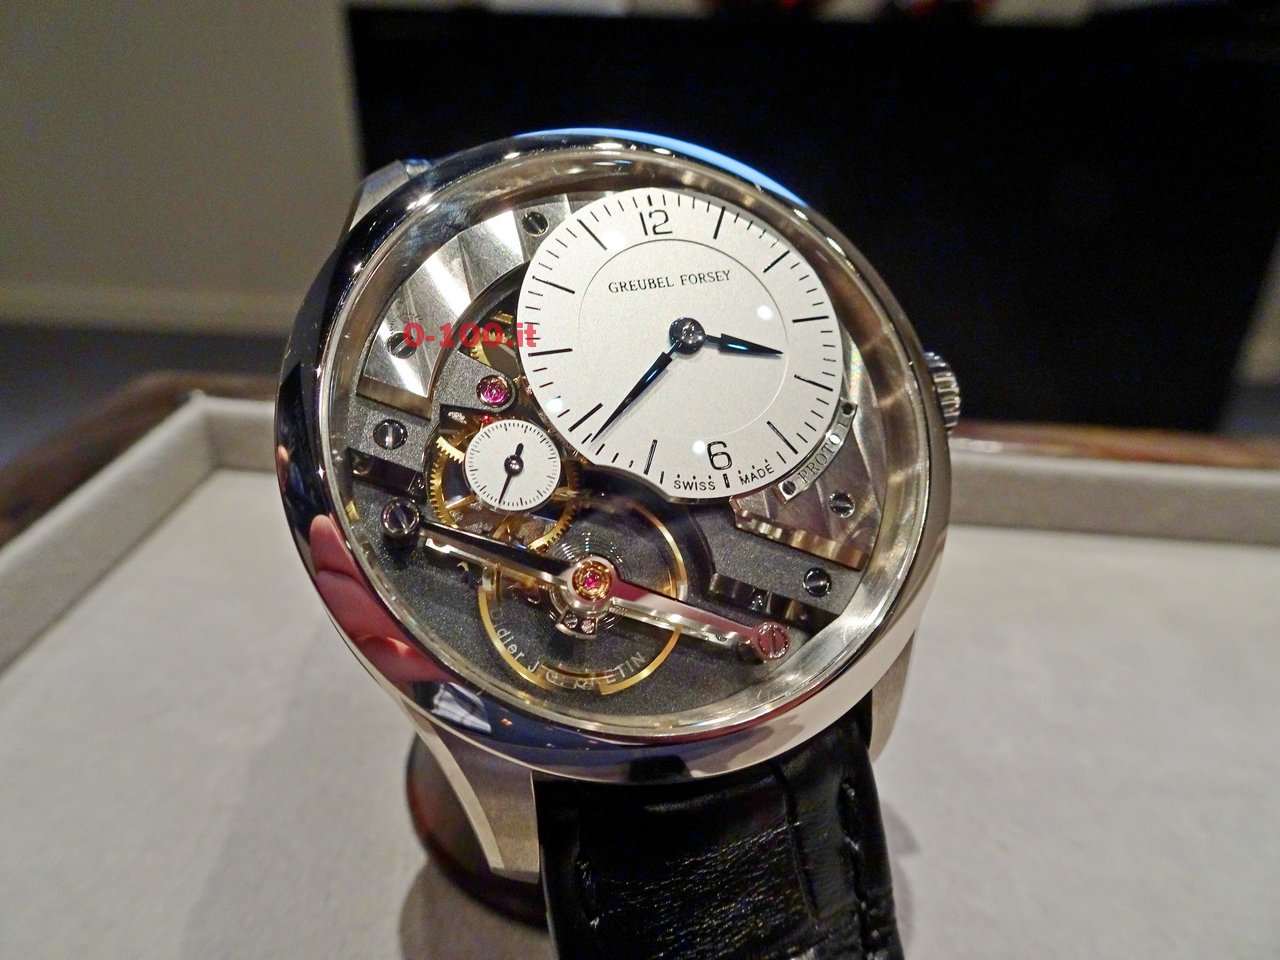 greubel-forsey-sihh-2016-0-100_12